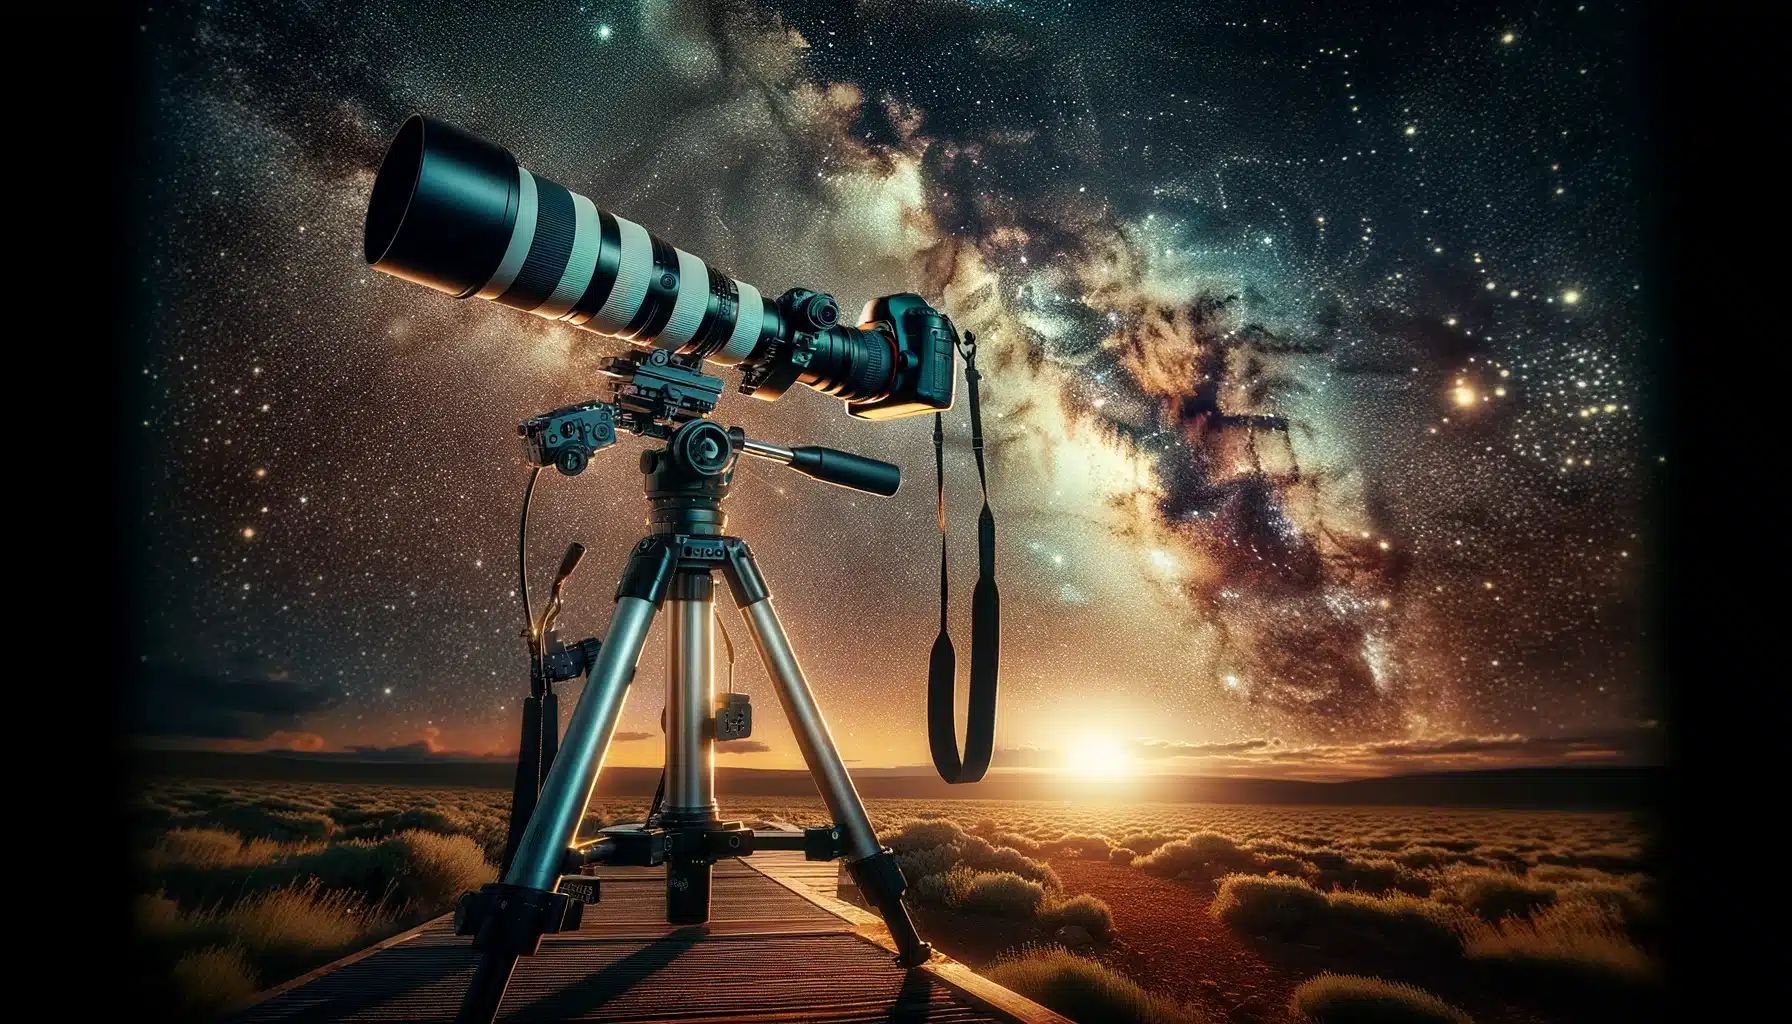 Professional astrophotography setup with a telescope and camera on a tripod under a starry sky featuring the Milky Way.